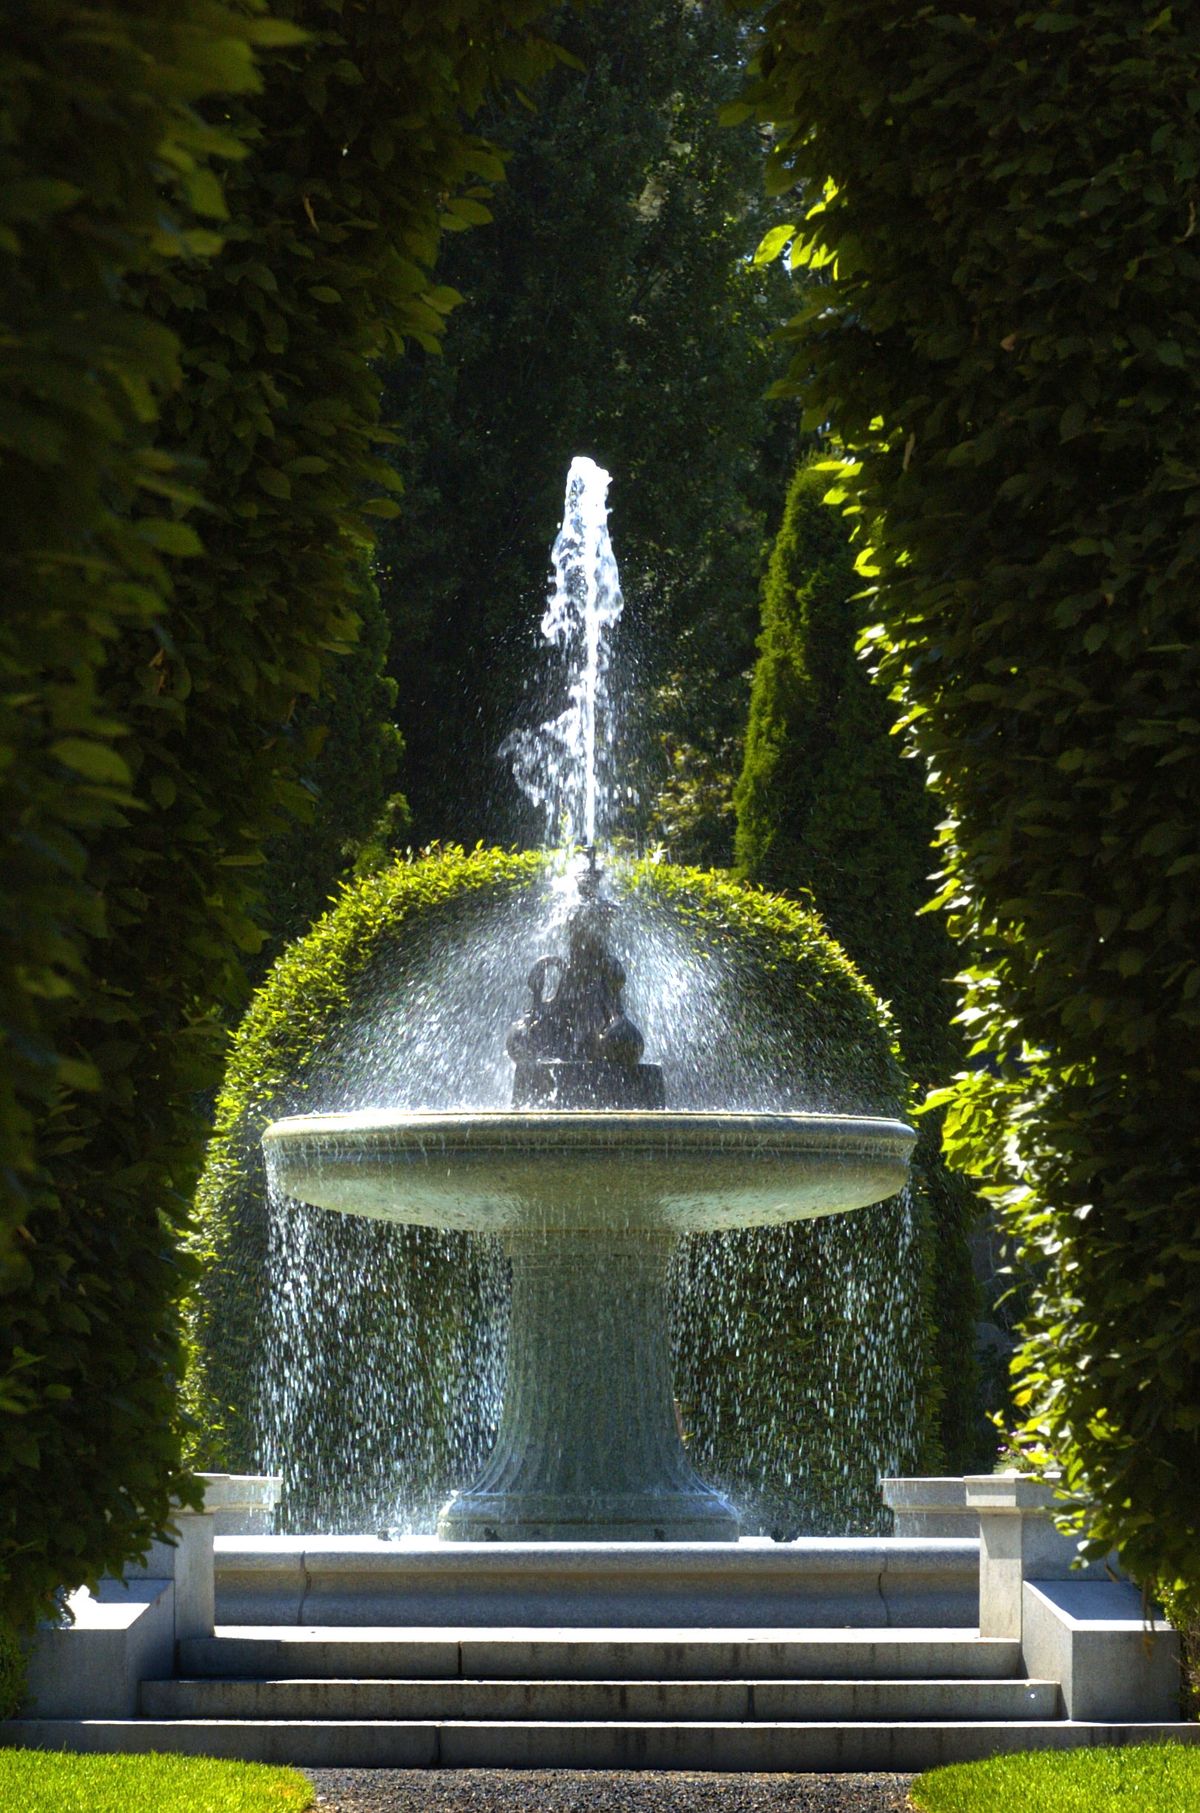 Duncan Garden in Manito Park provides the setting for Mozart on a Summer’s Eve. (File)